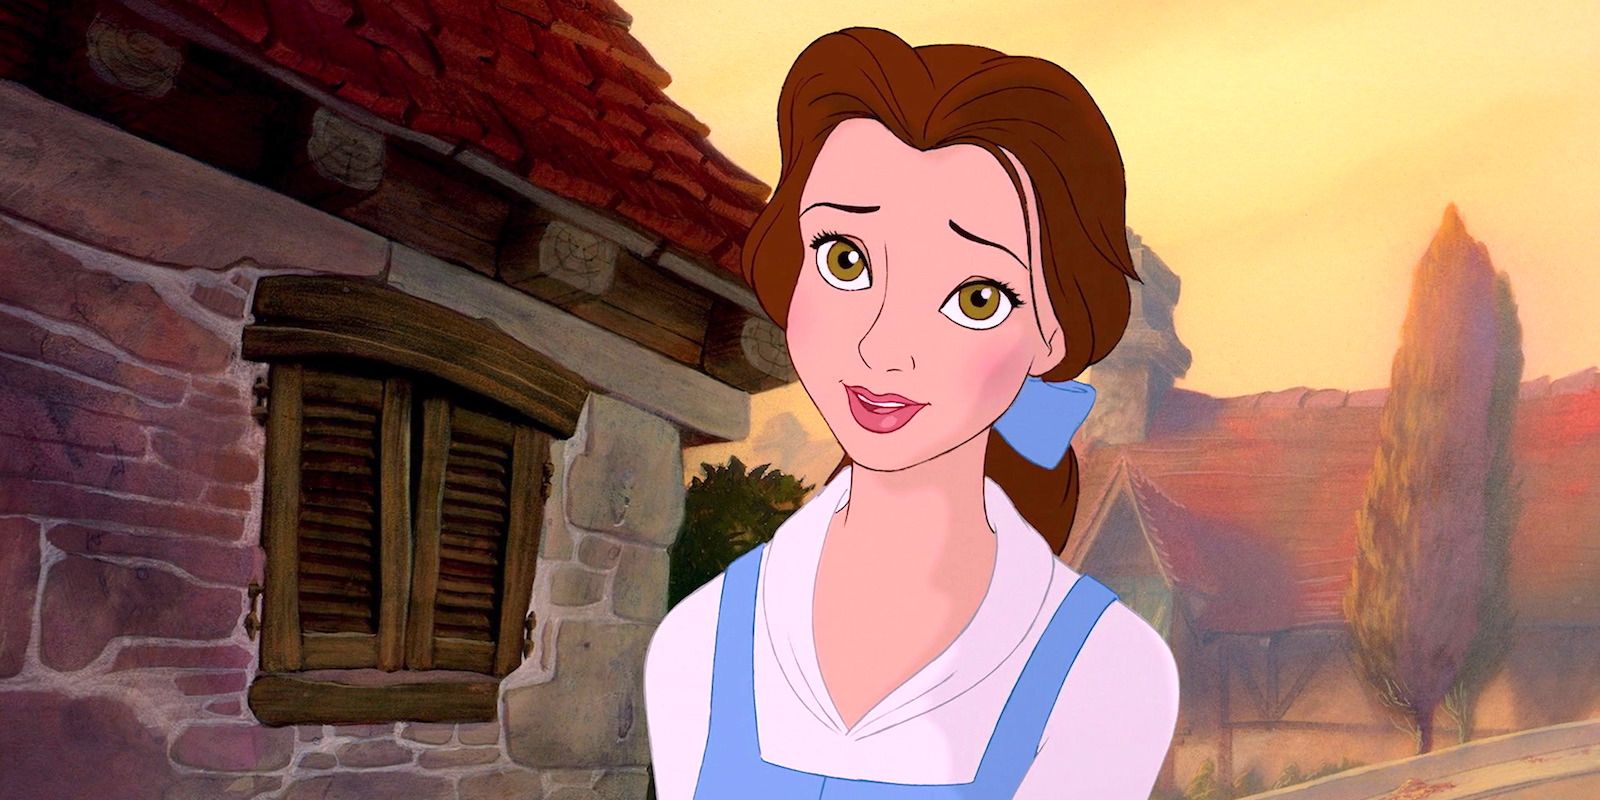 Belle smiles in her village in Beauty and the Beast 